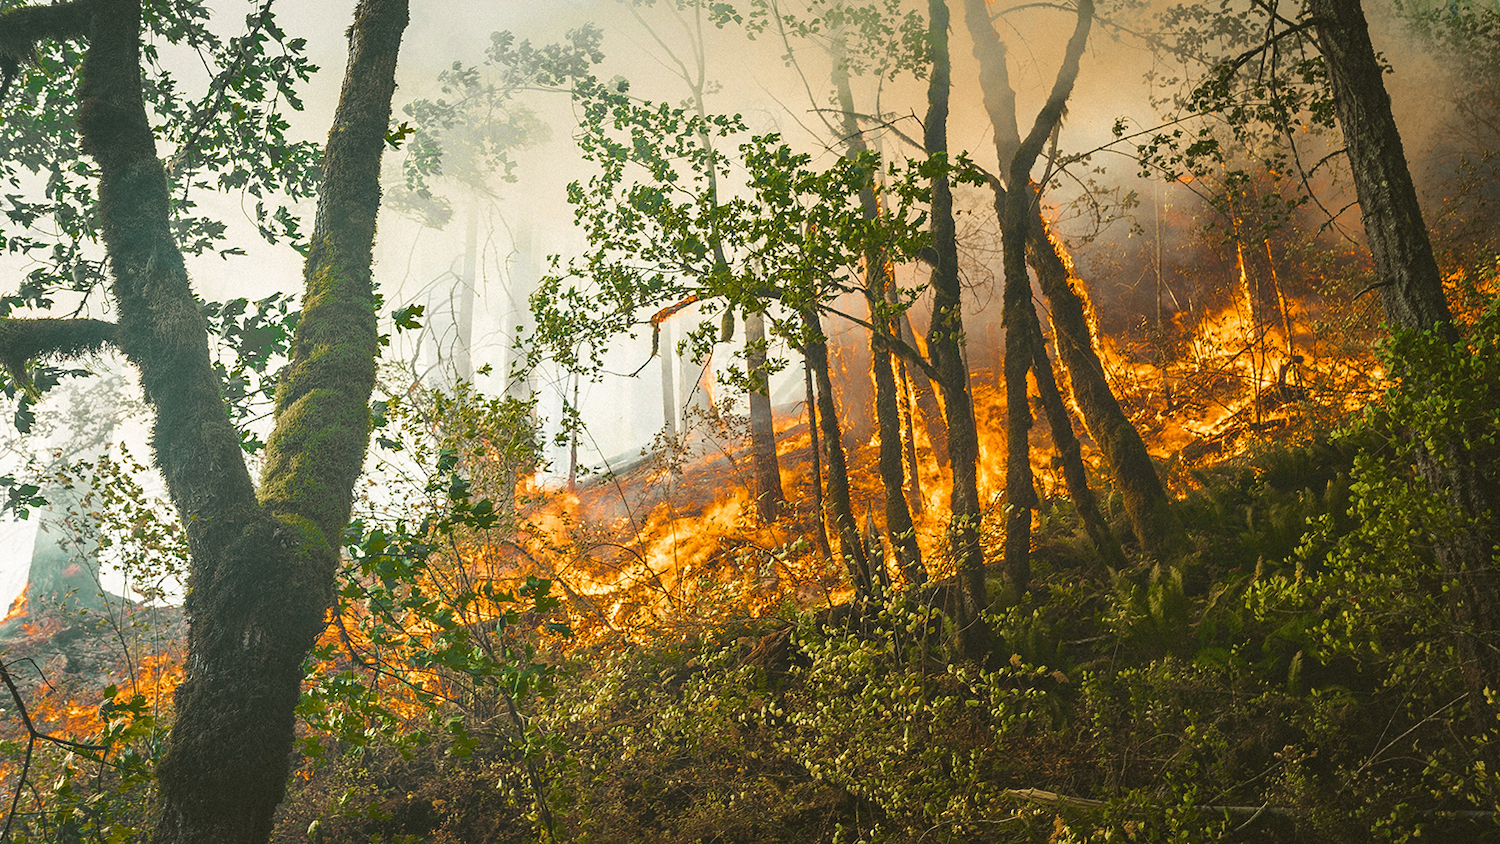 Forest Fire - Amazon Rainforest Fires: Everything You Need to Know - College of Natural Resources News - NC State University